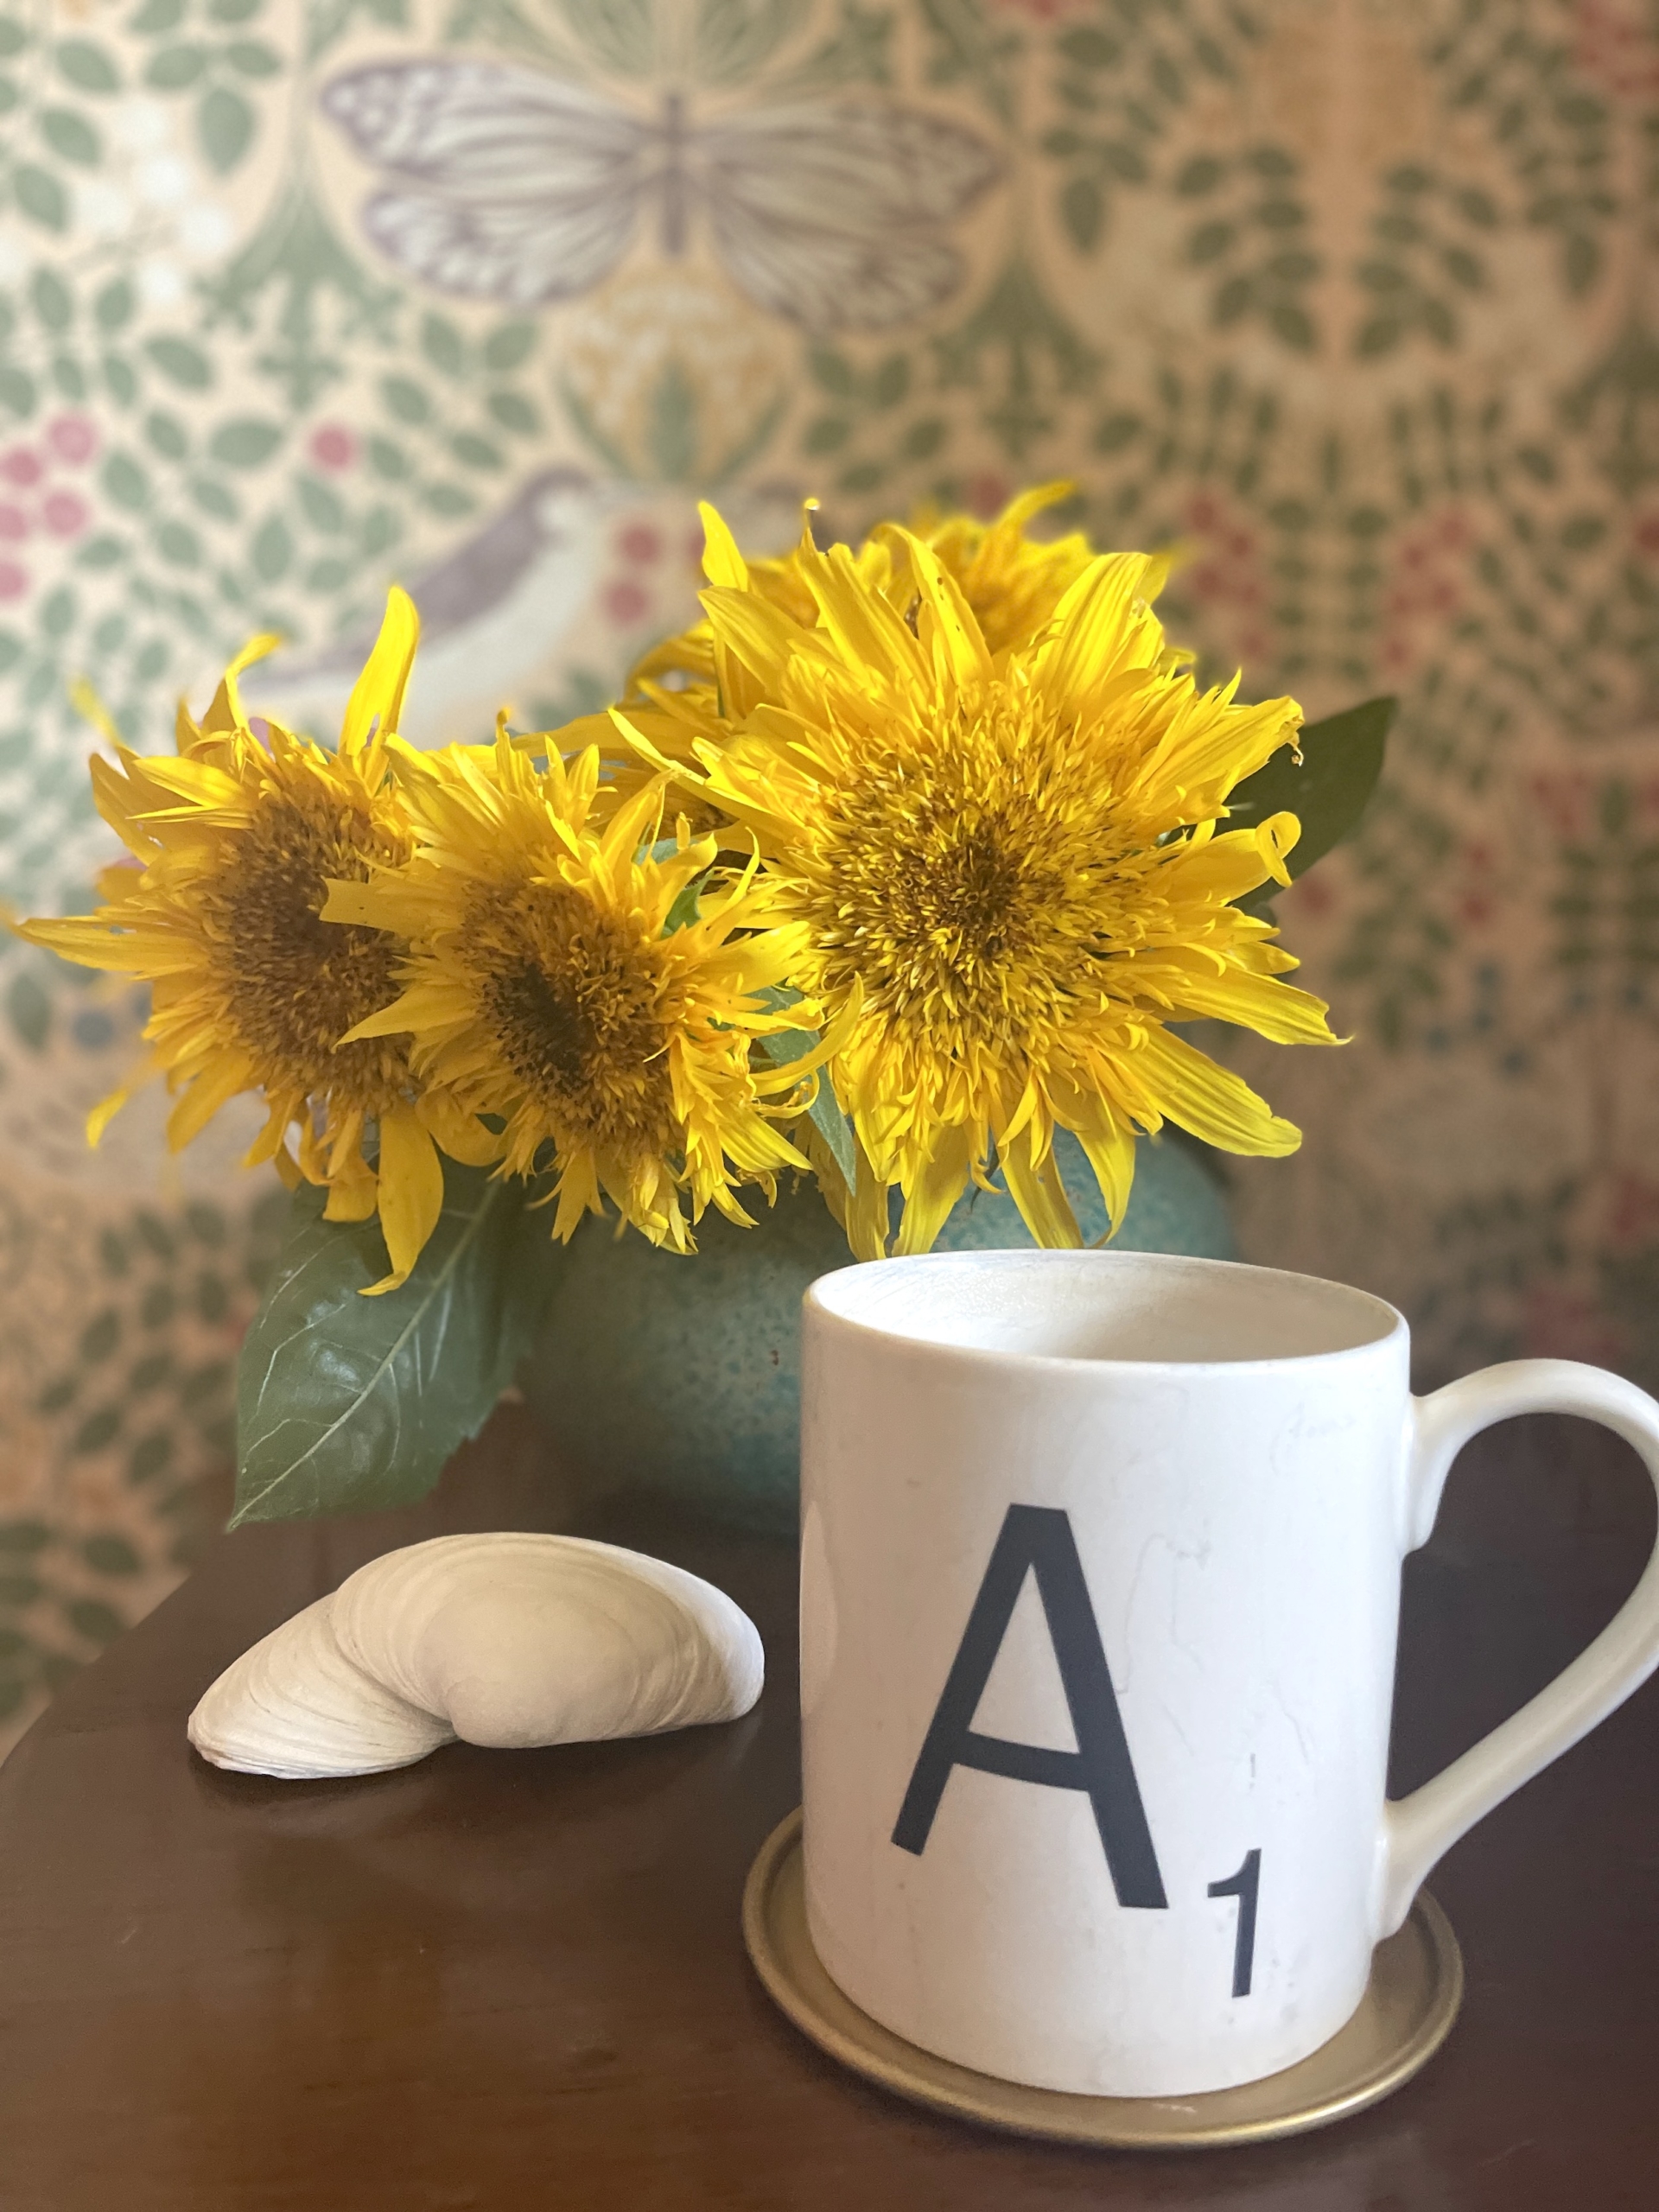 14 Things That Made Me Smile This Month, So Far . . . (August 2022)